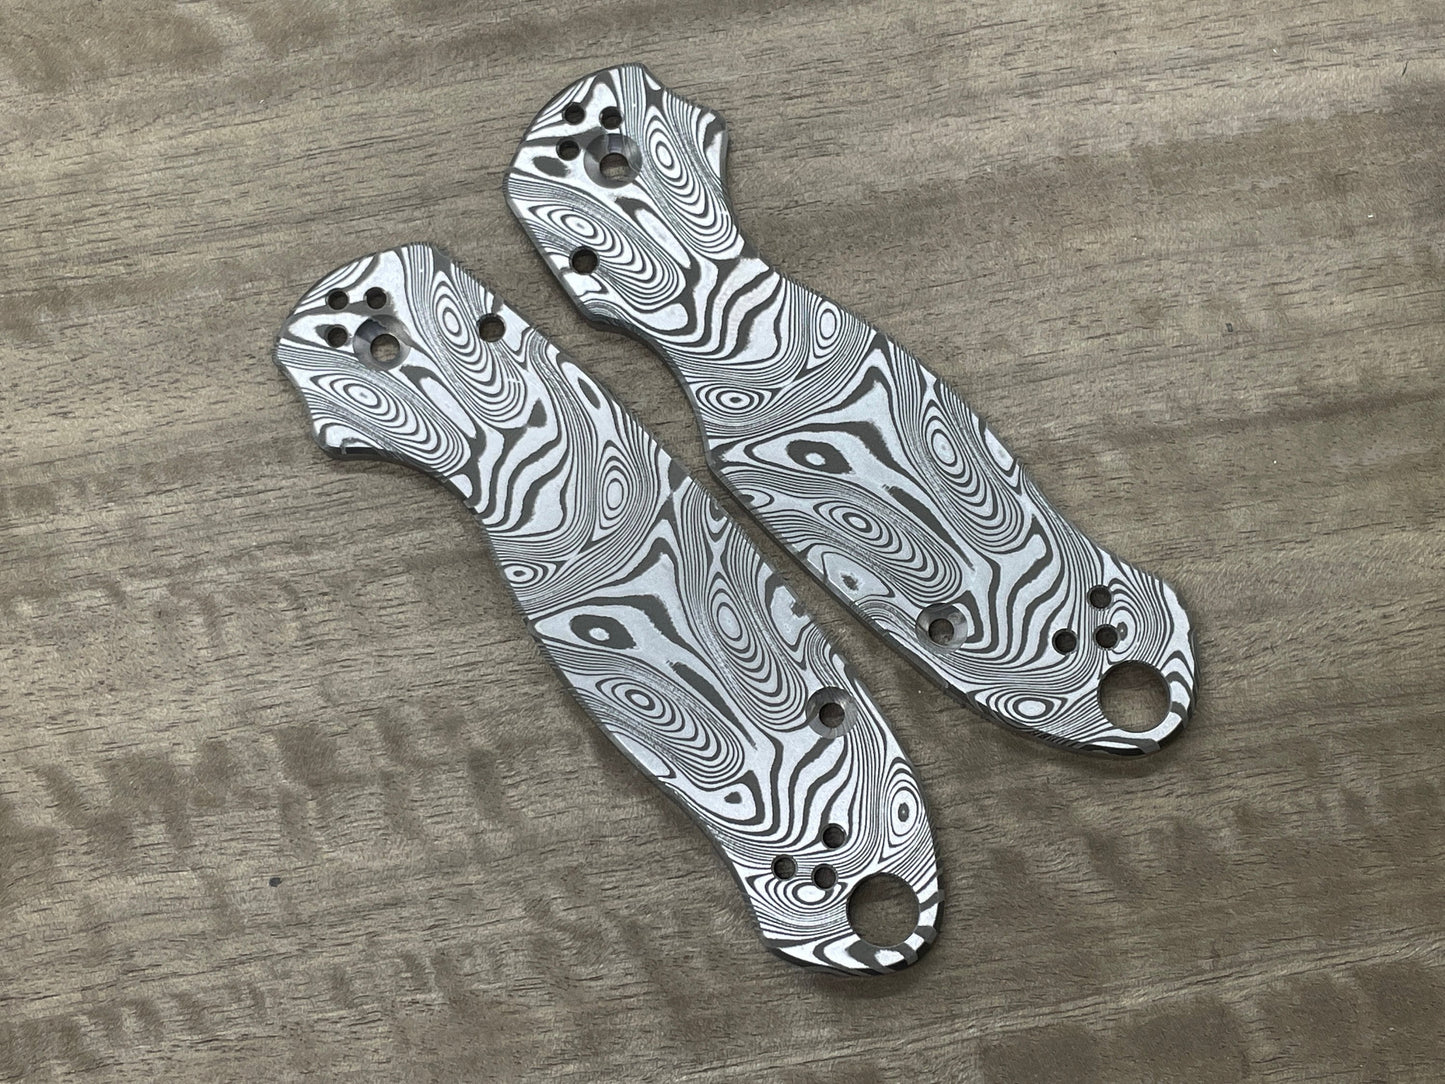 DAMASTEEL pattern engraved Titanium Scales for Spyderco Paramilitary 2 PM2